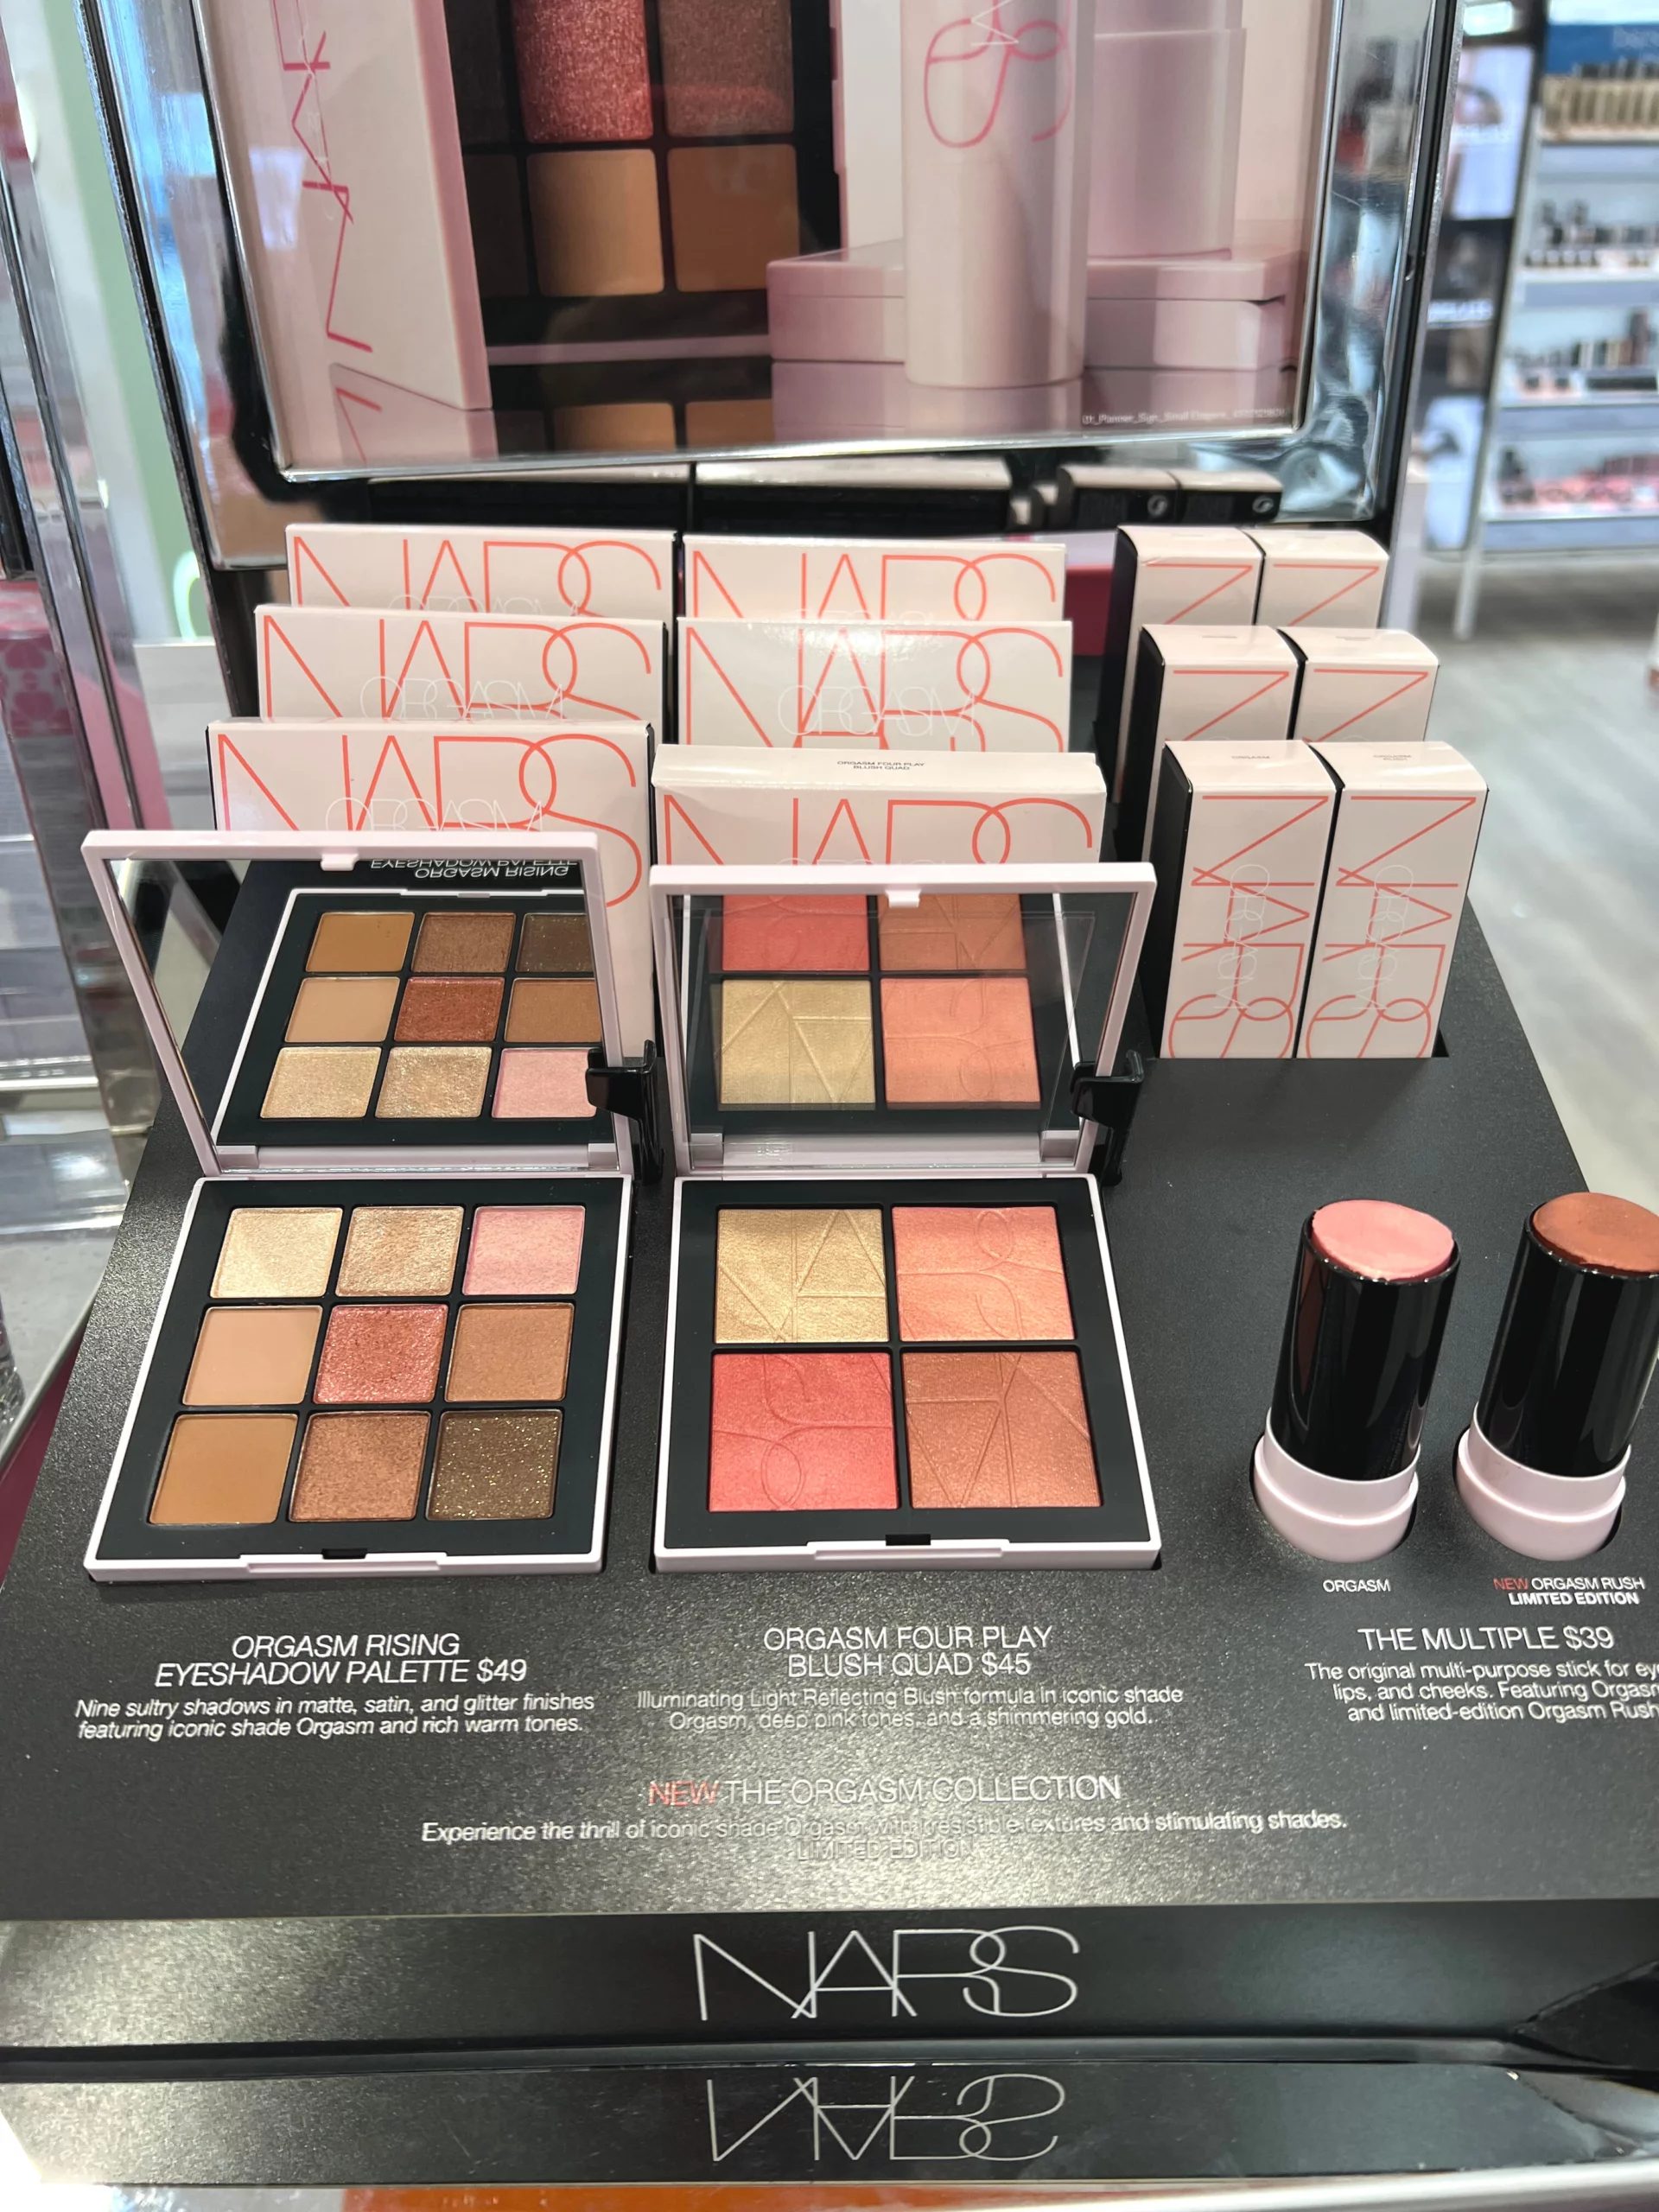 Limited Edition Nars Orgasm Rising Eyeshadow Palette Review